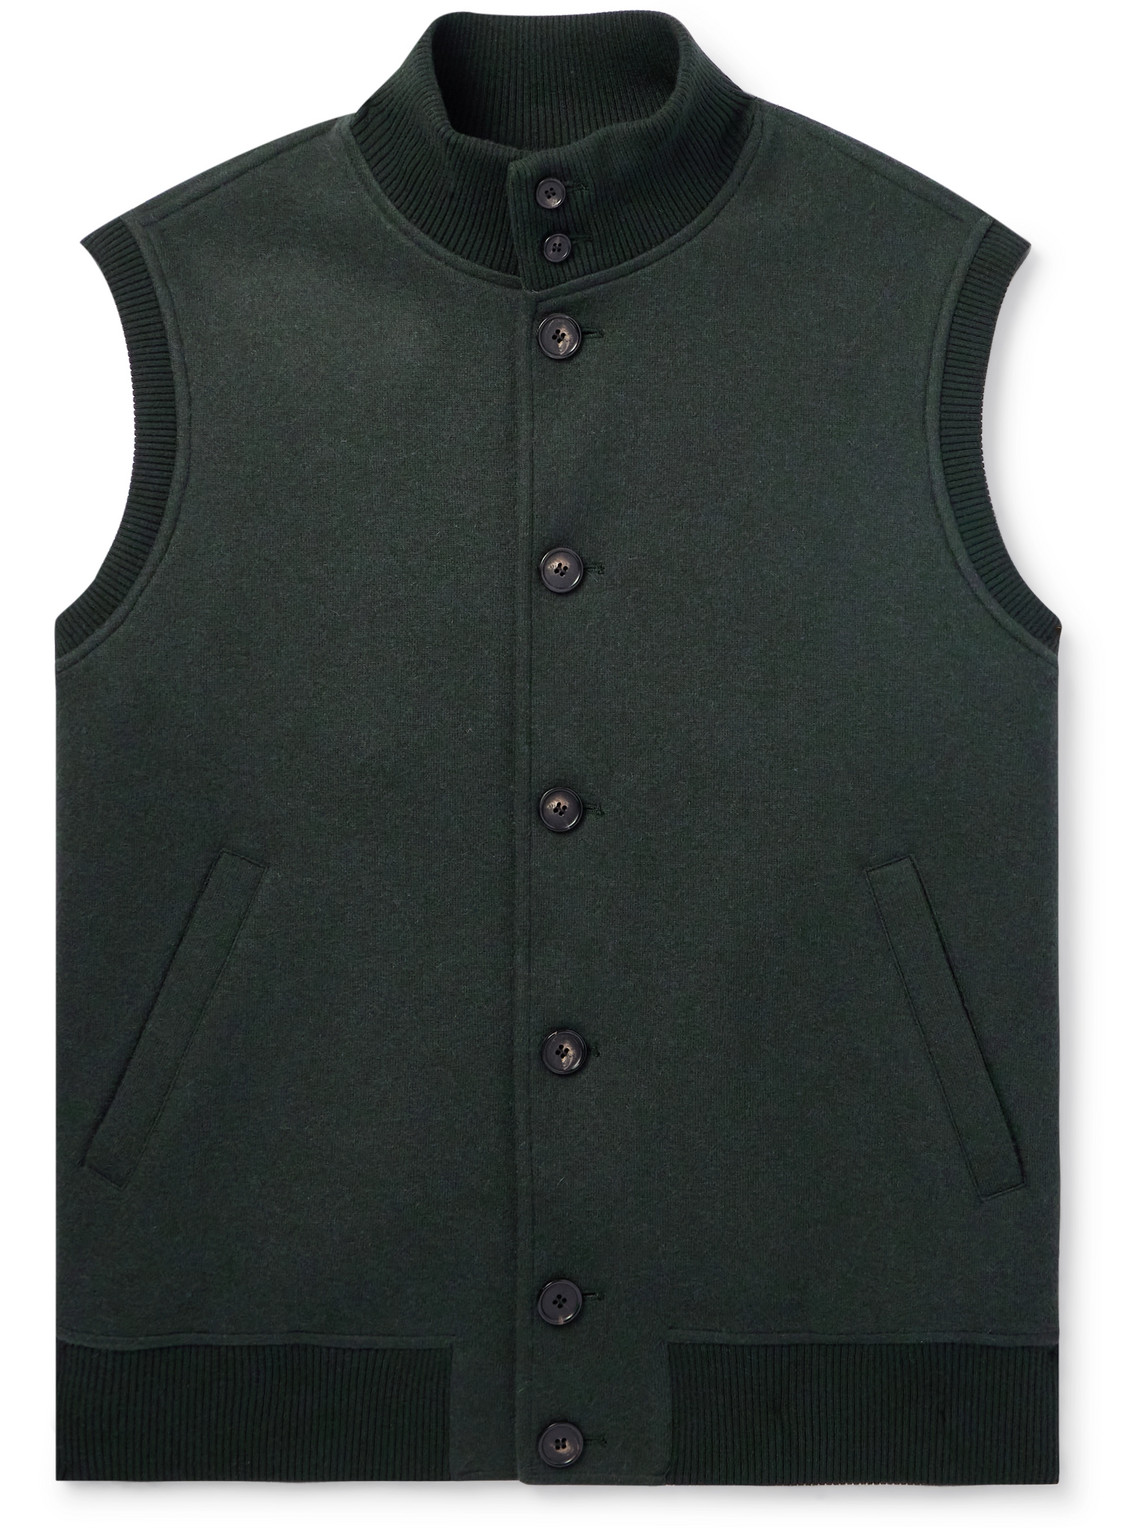 Carry Padded Cashmere Gilet